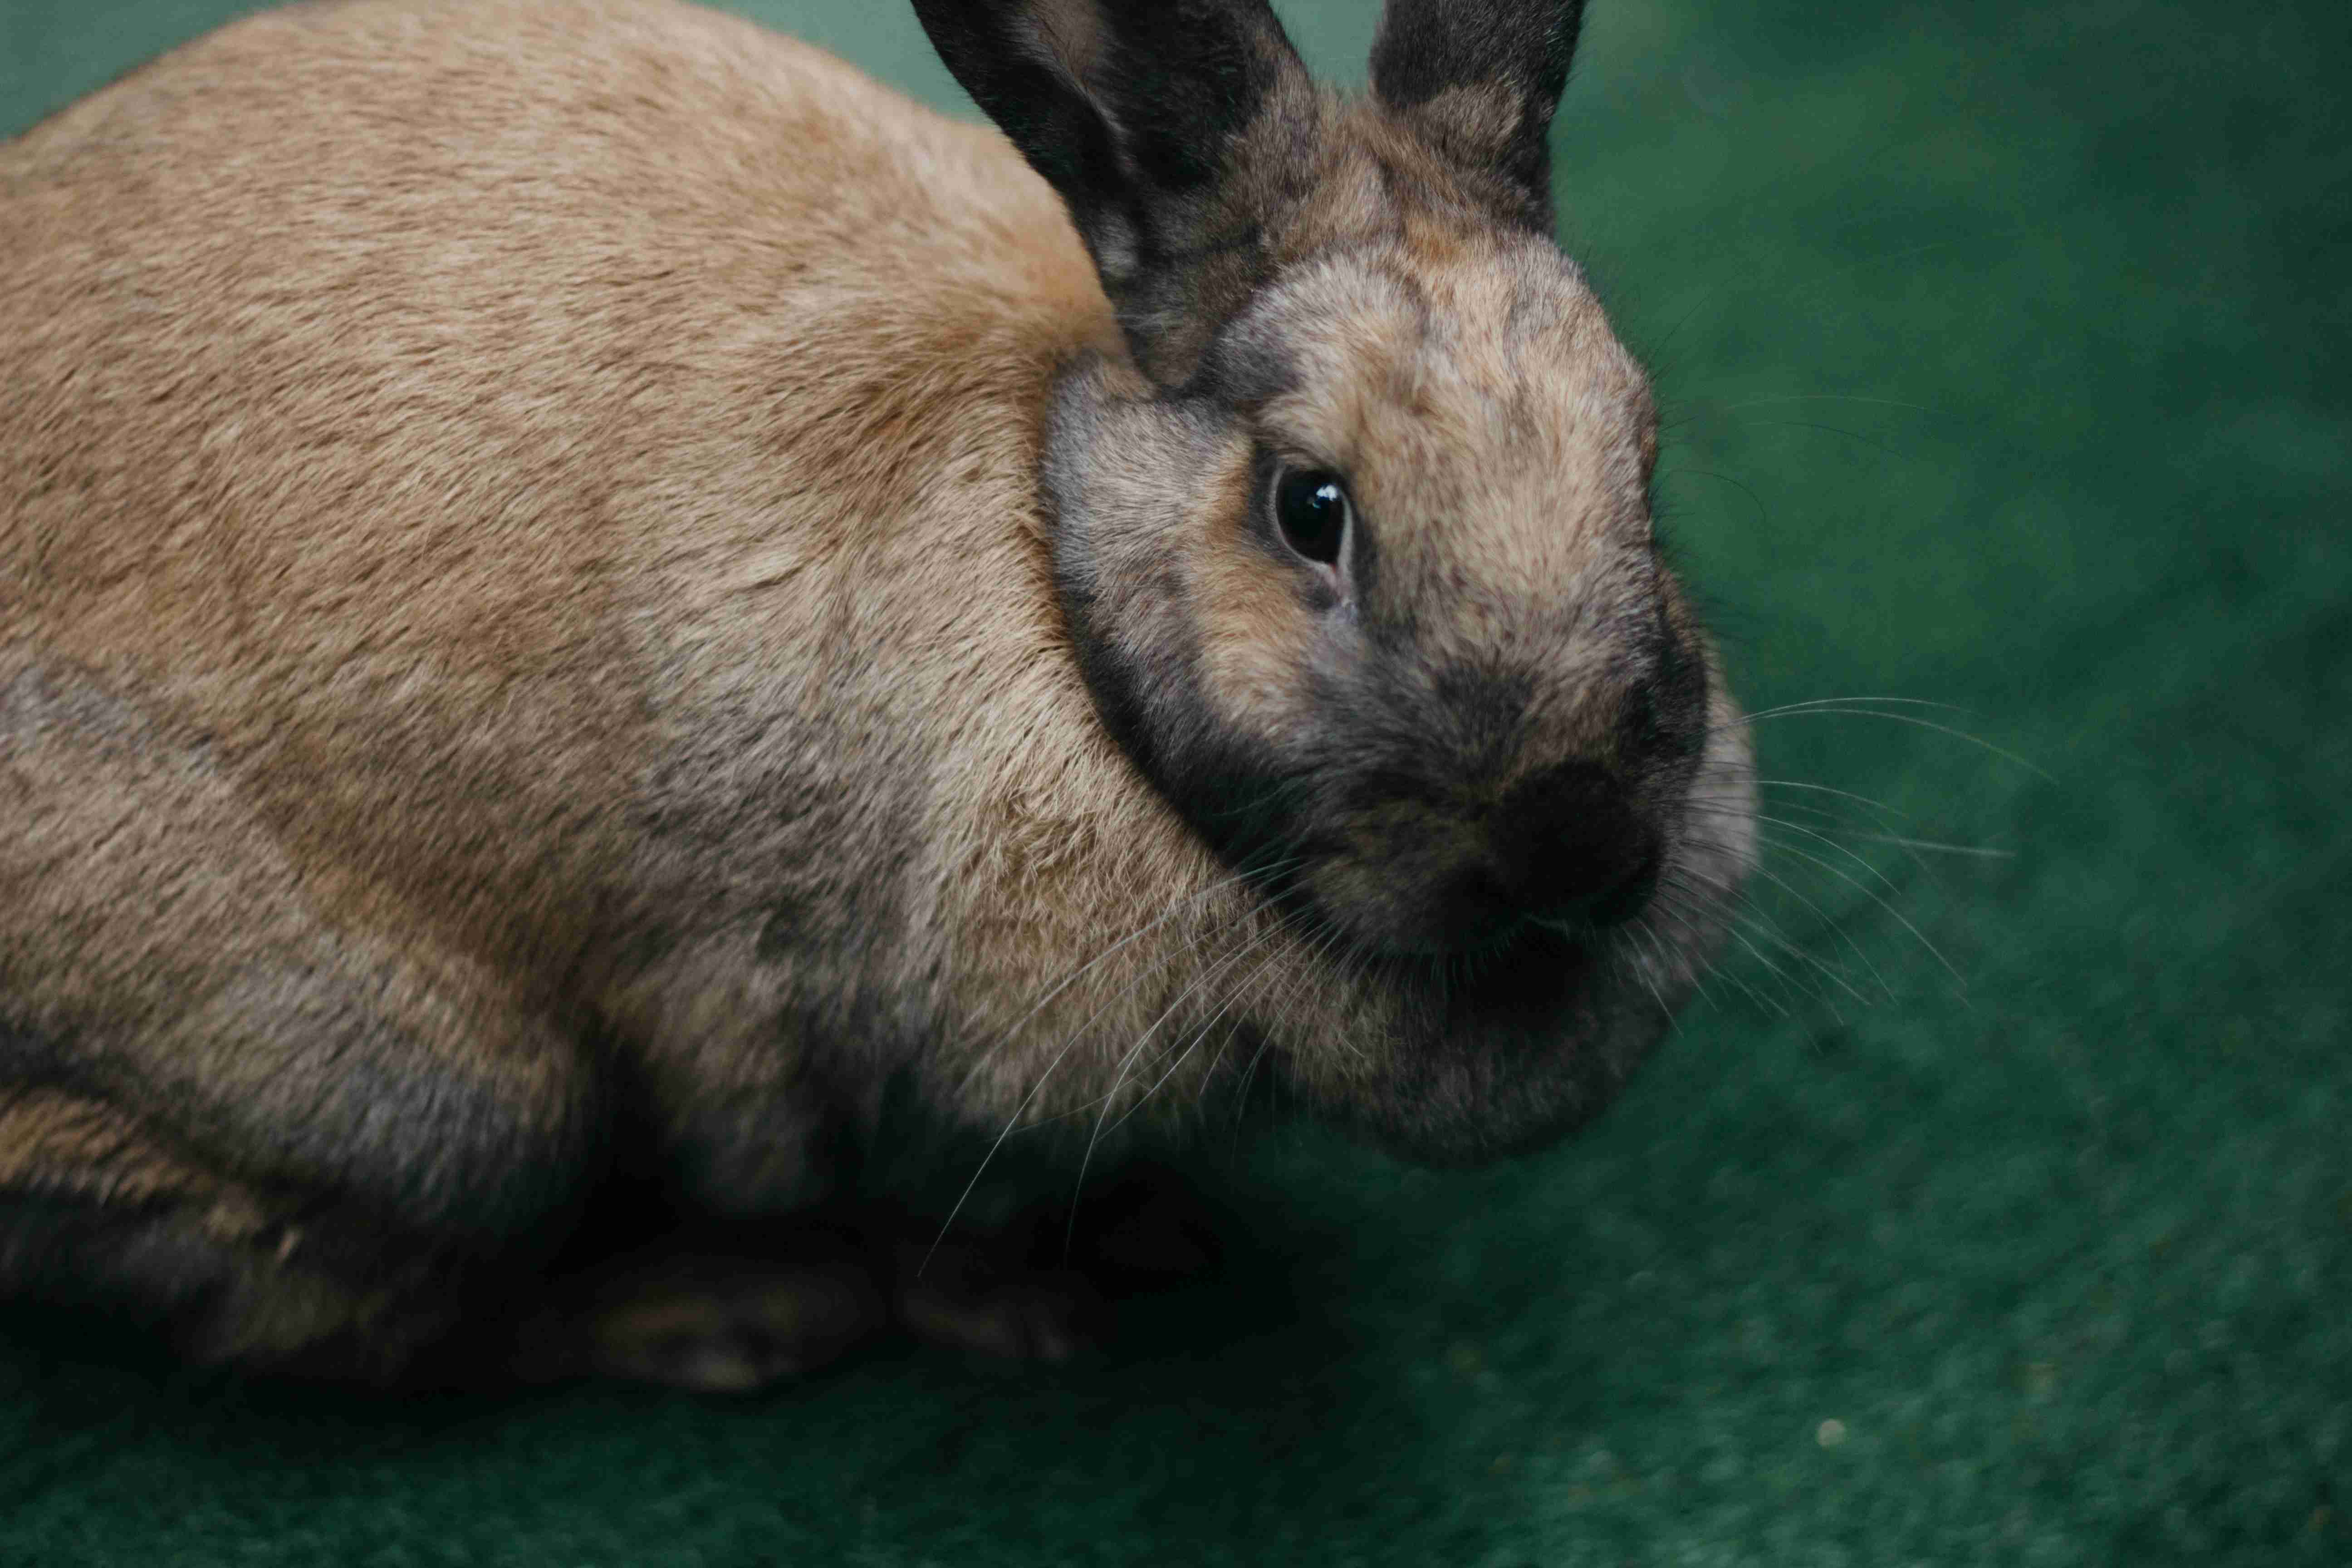 Identifying Broken Bones in Rabbits: Common Symptoms to Look Out For